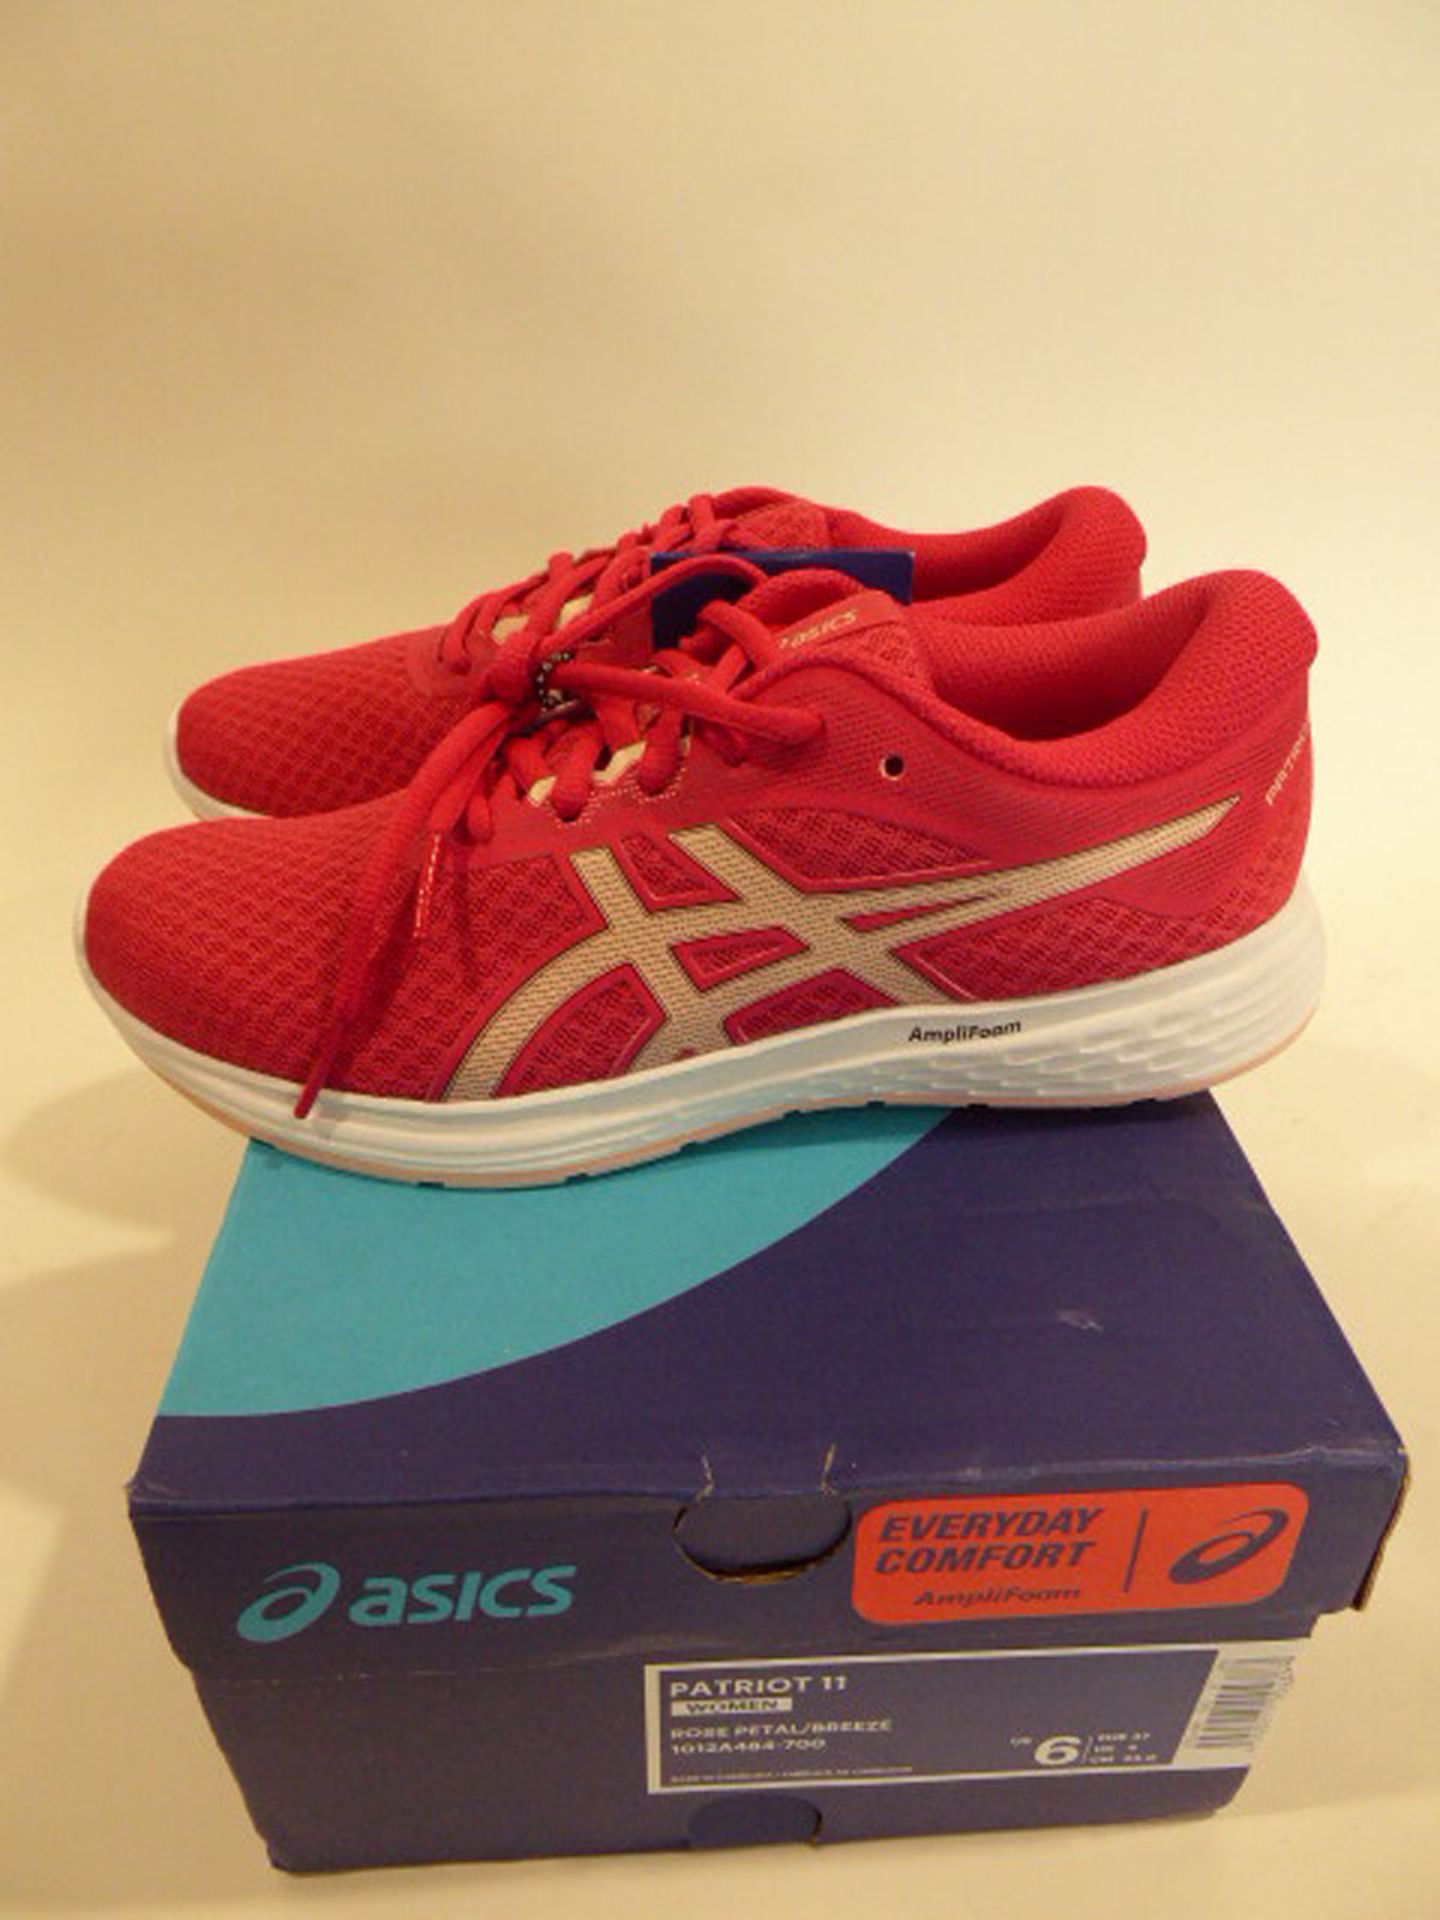 Asics Patriot 11 womens trainers size 4 and a pair of Asics Netburner Ballistic FF trainers size 5 - Image 3 of 5